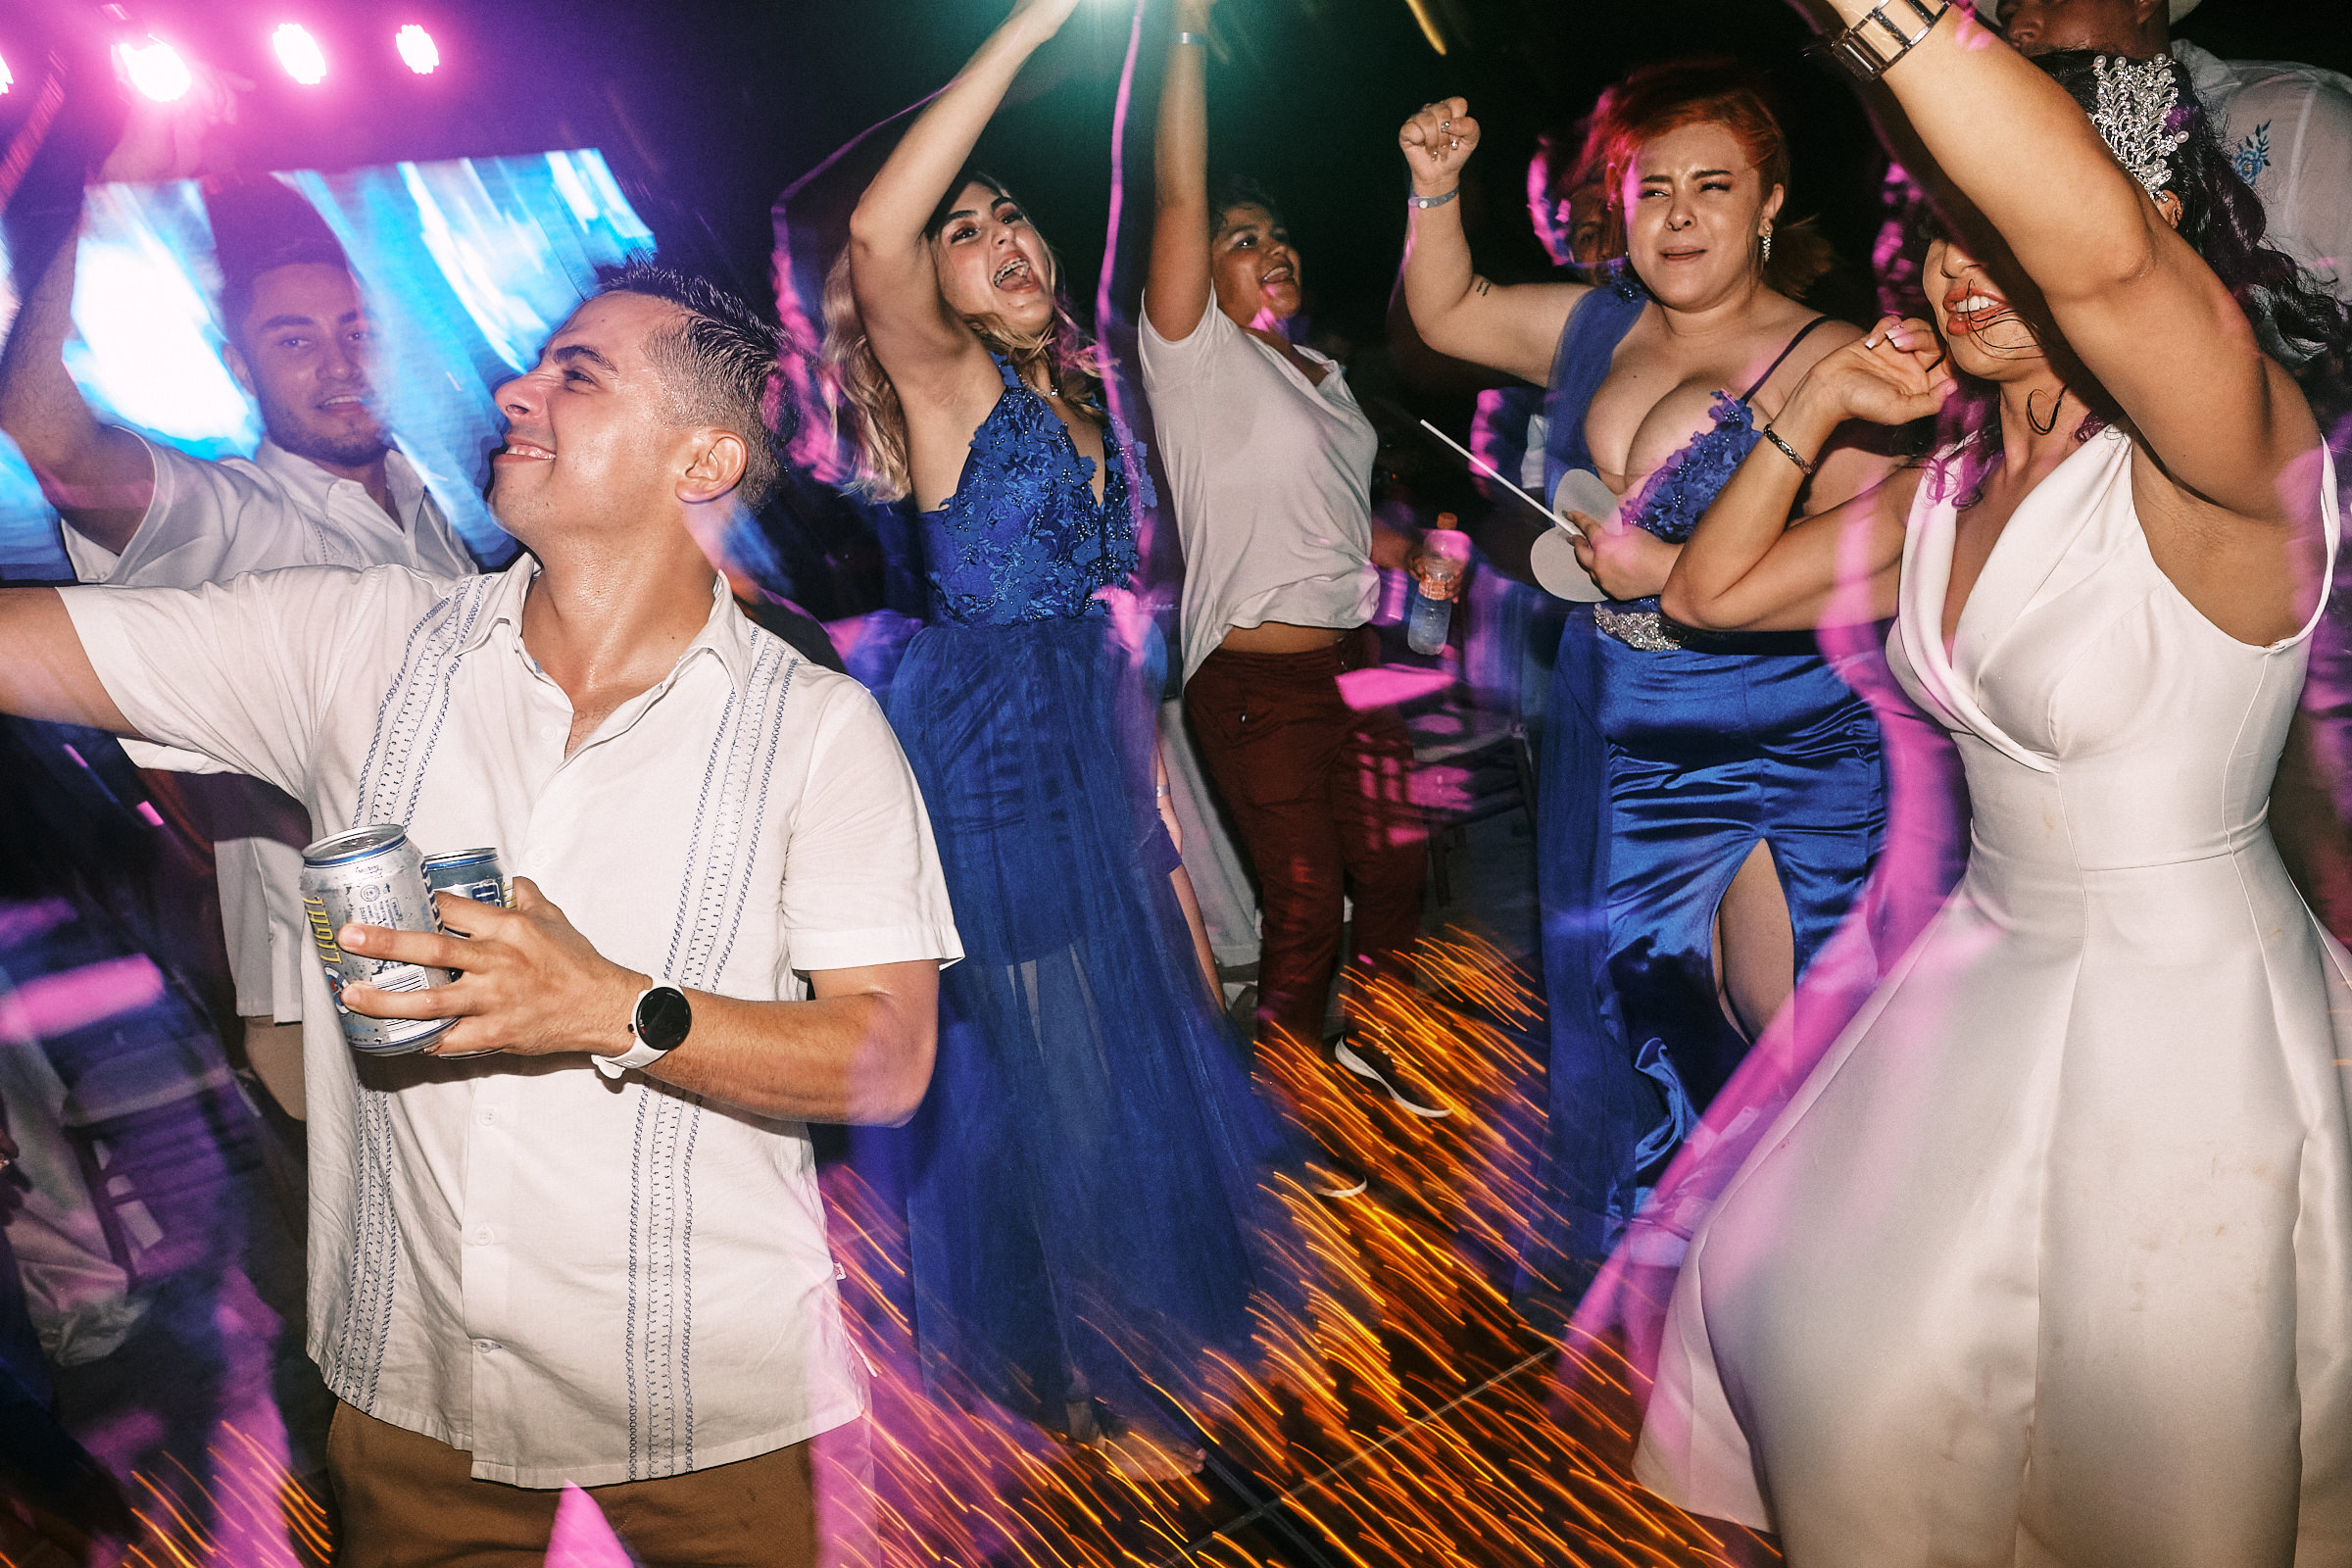 Energetic Photo Of Bride And Friends Dancing